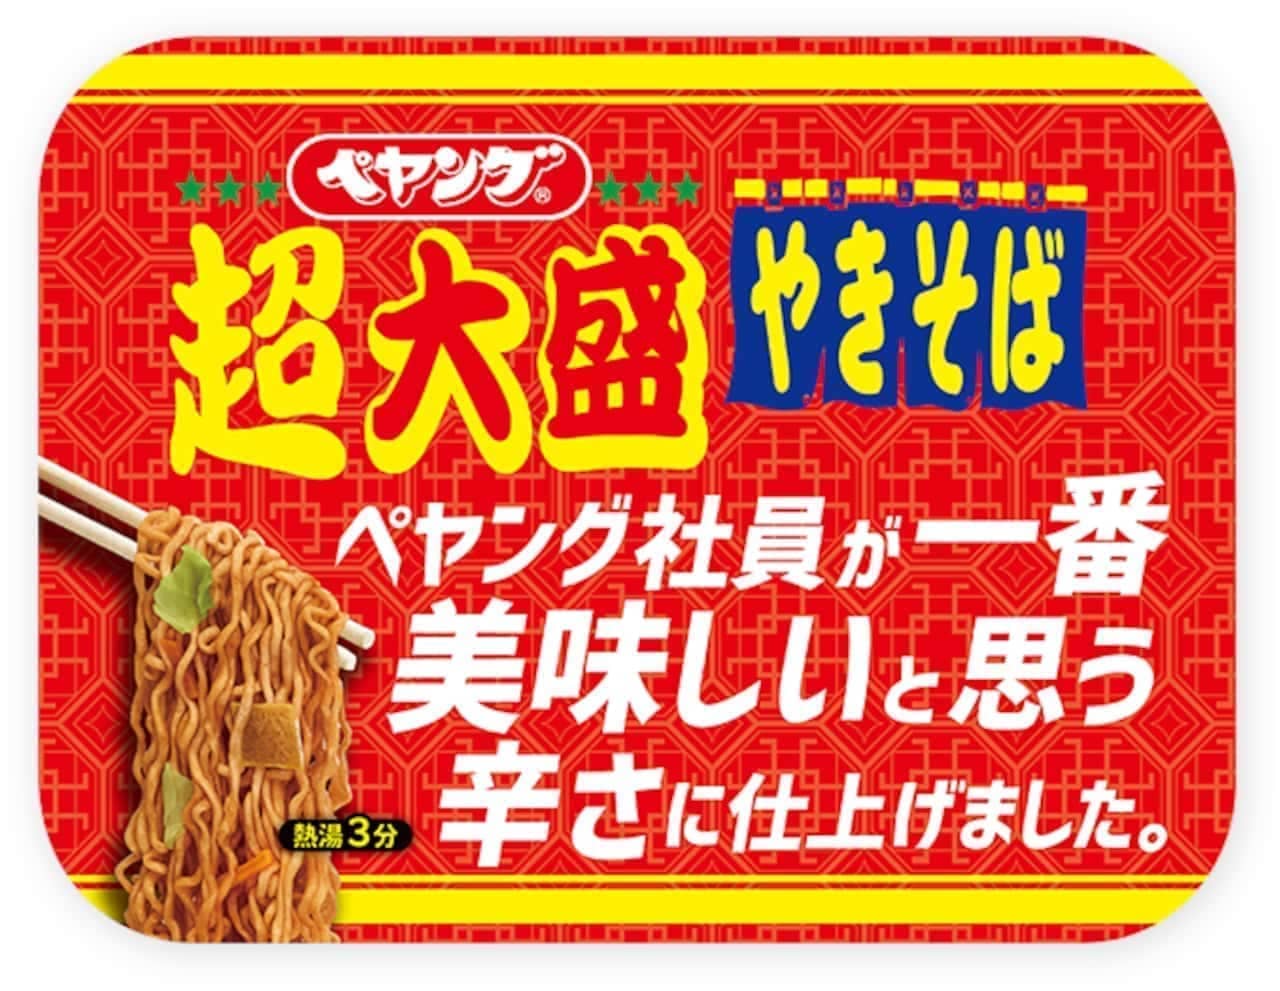 Maruka Foods "Peyoung Super Large Yakisoba Employee's Most Delicious Spicy"